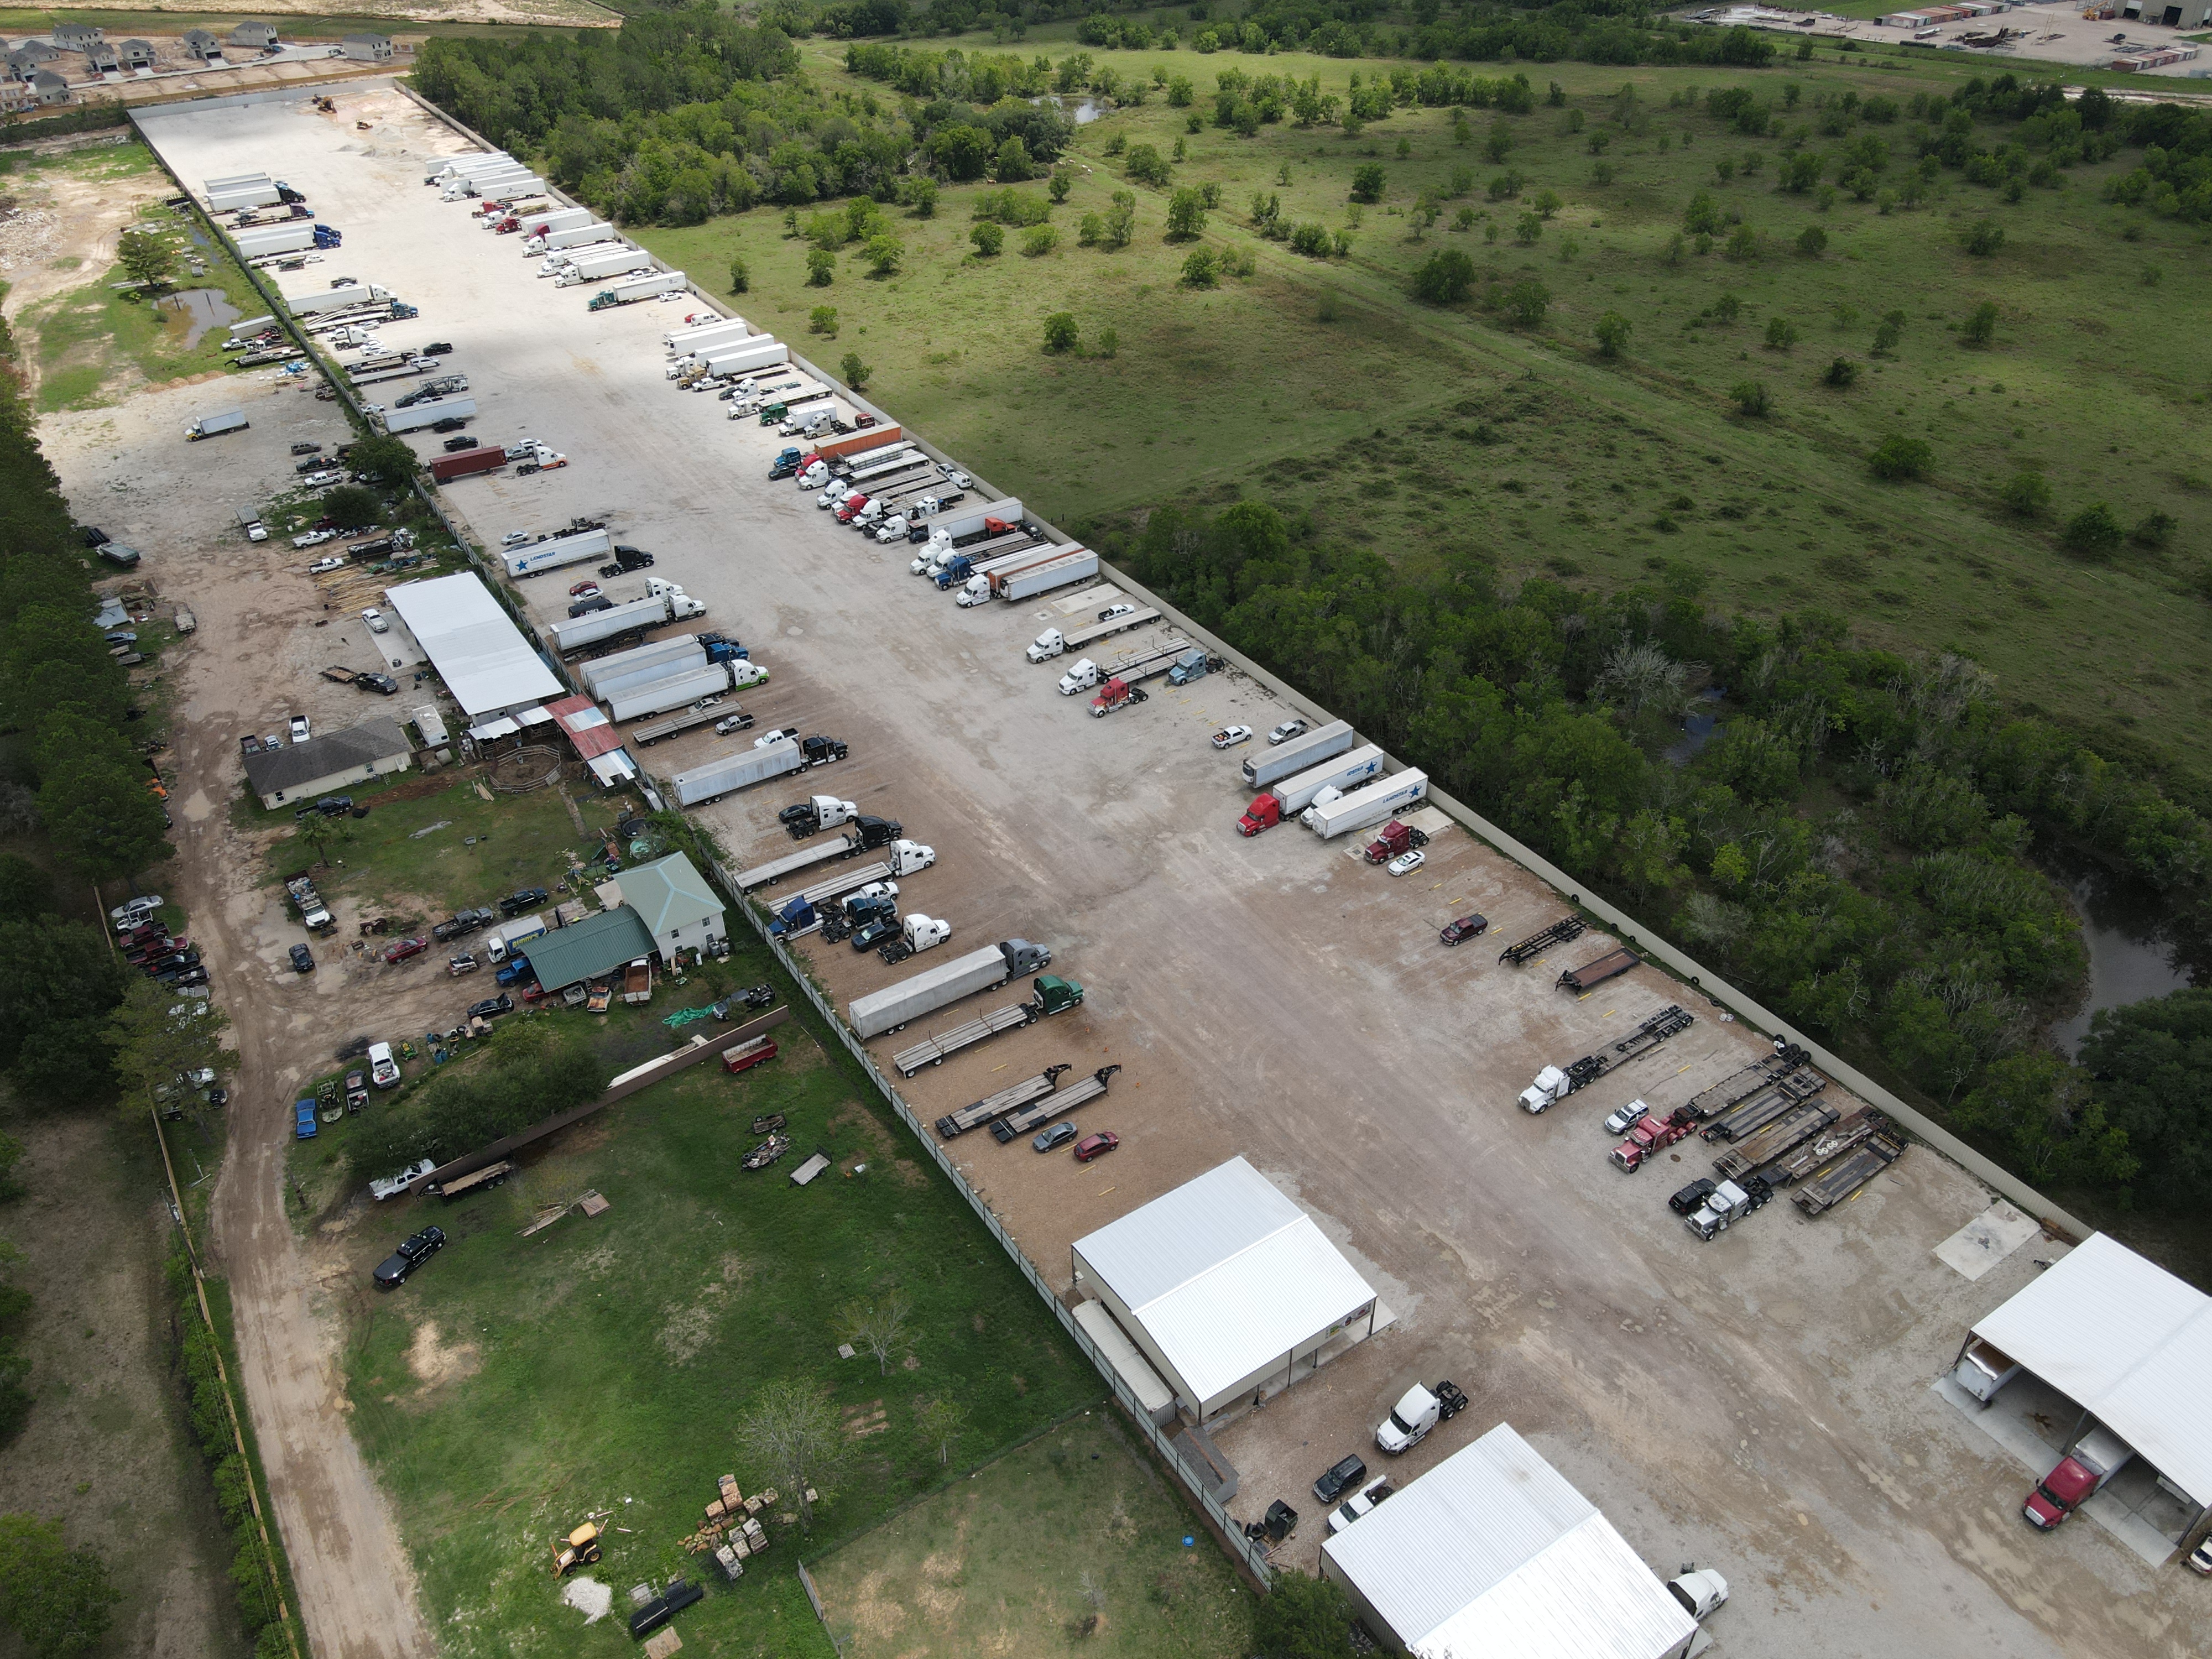 Katy Parking Lot overhead view